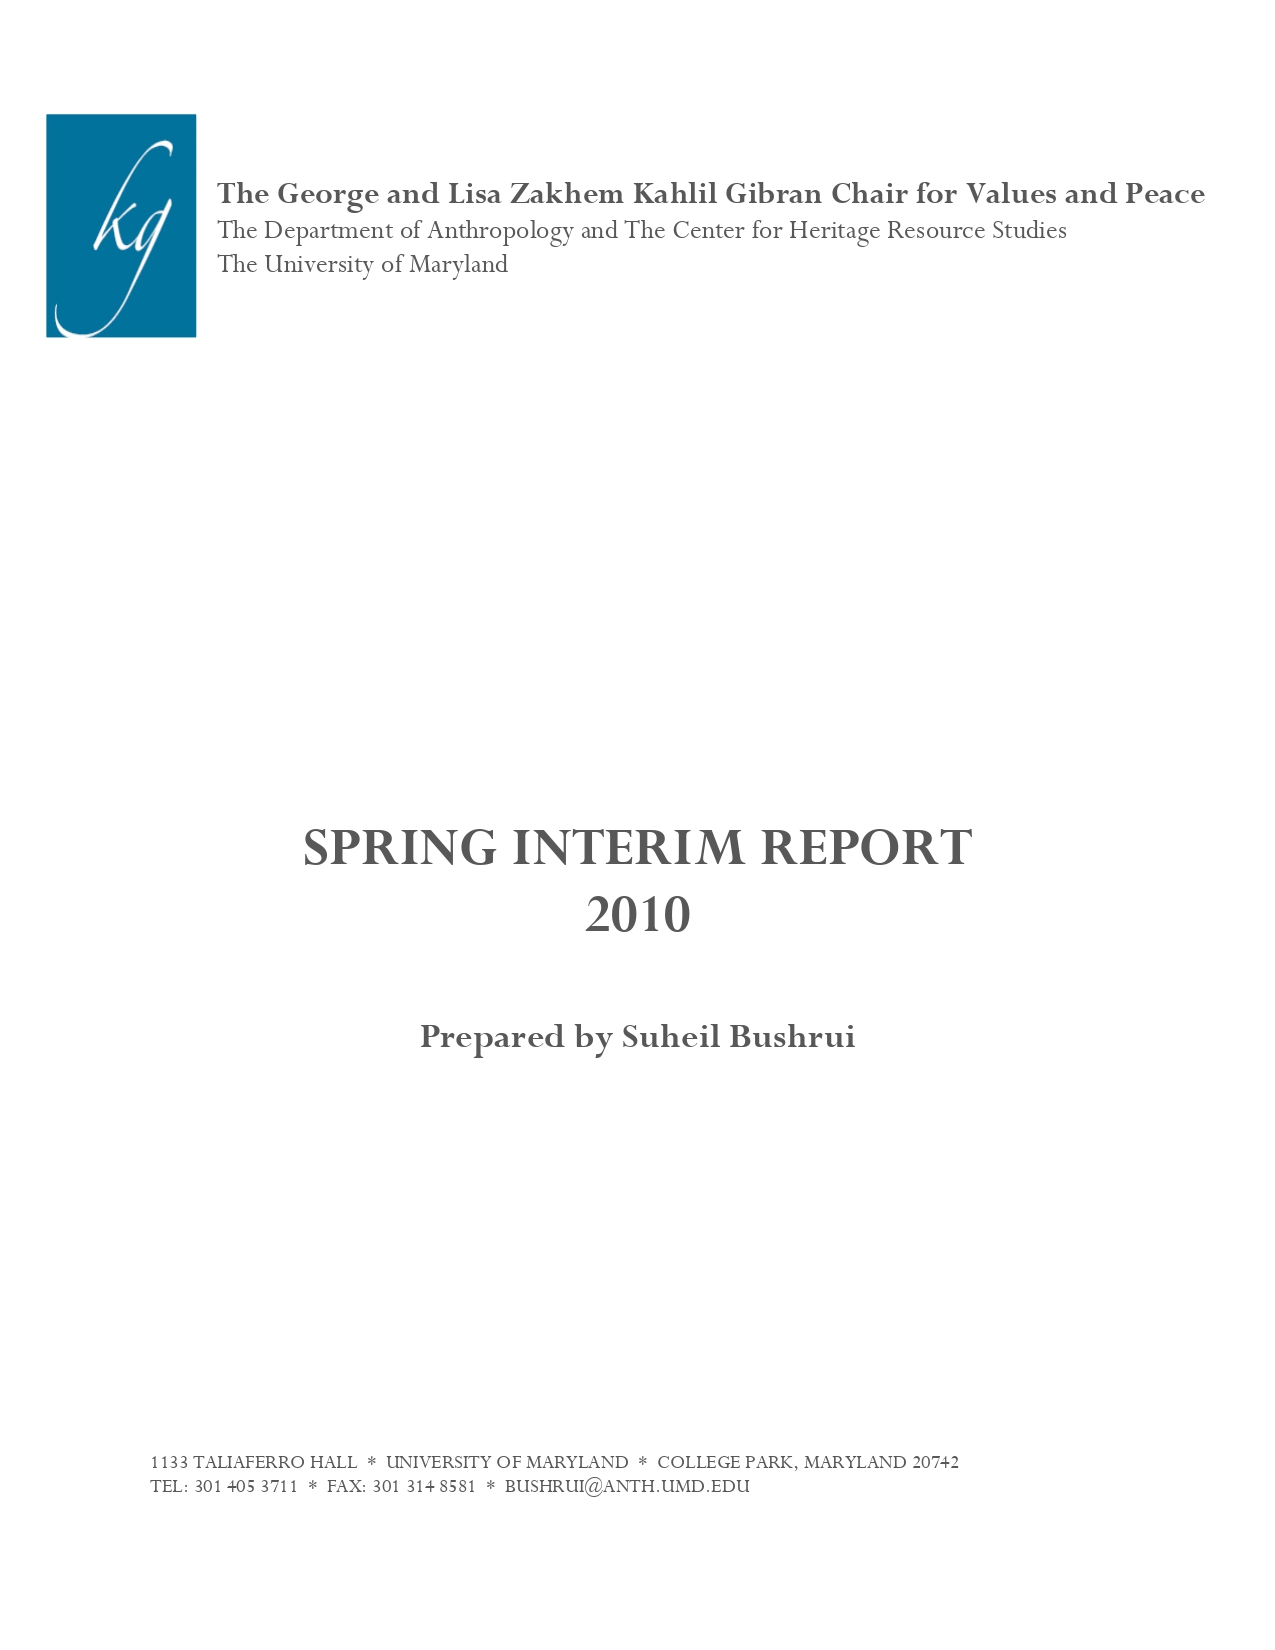 Spring Interim Report, The George and Lisa Zakhem Kahlil Gibran Chair for Values and Peace, 2010.